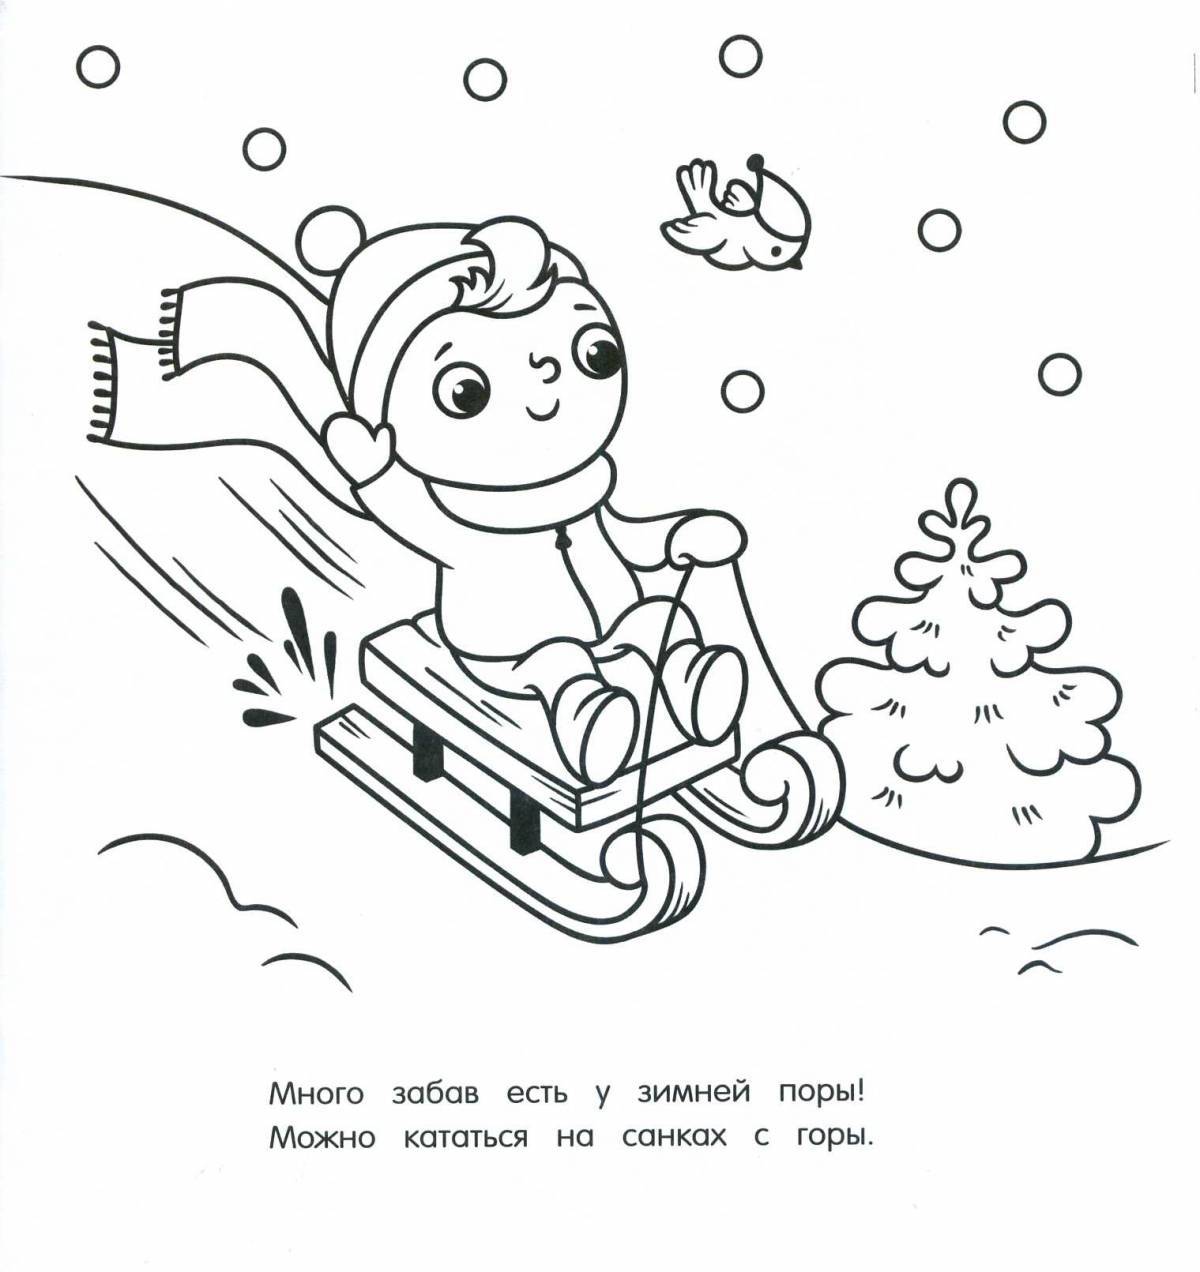 Exquisite winter coloring book for 3-4 year olds